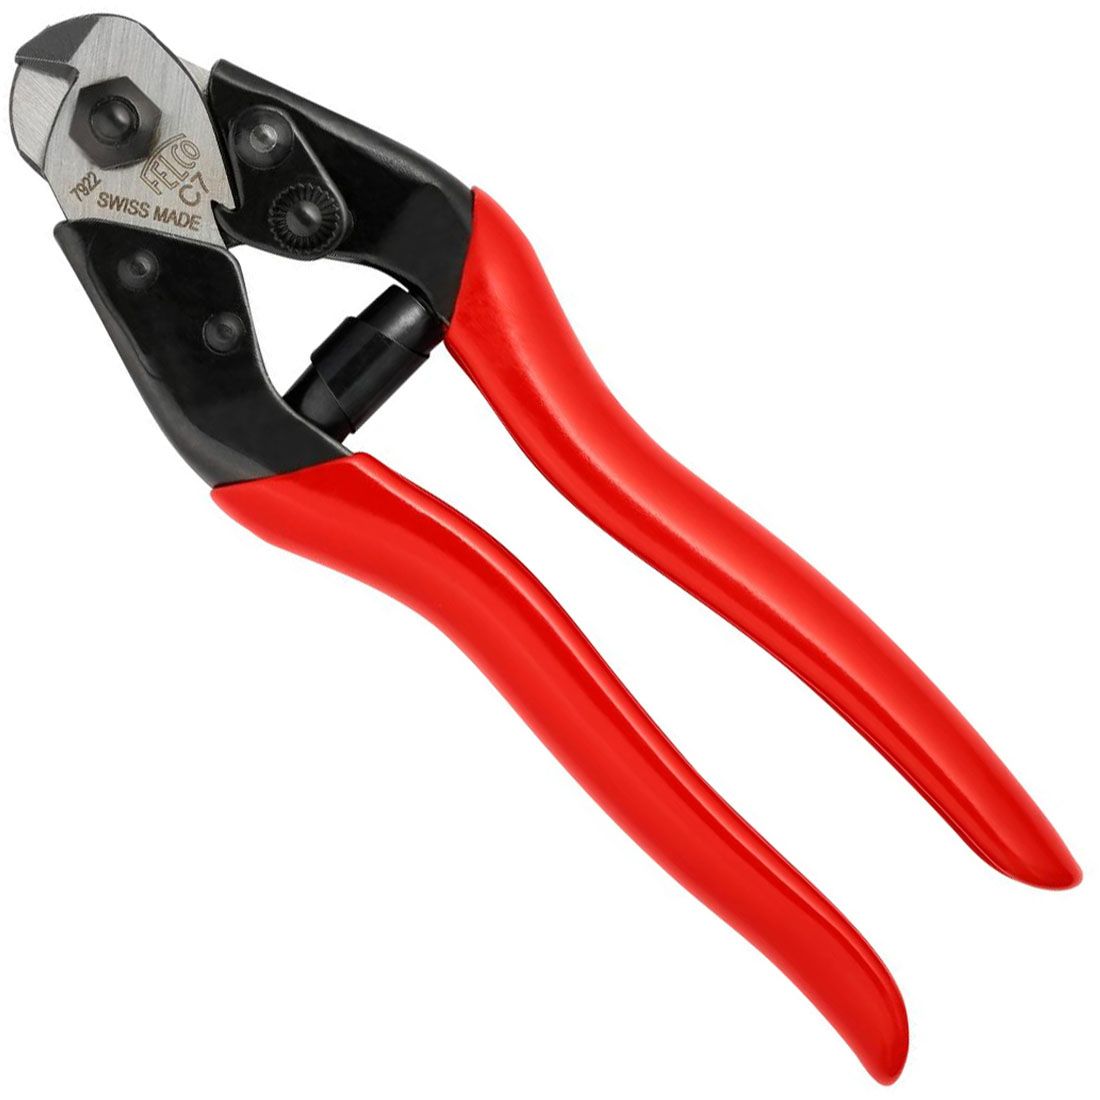 FELCO C7 Wire and Cable Cutter for sale online 